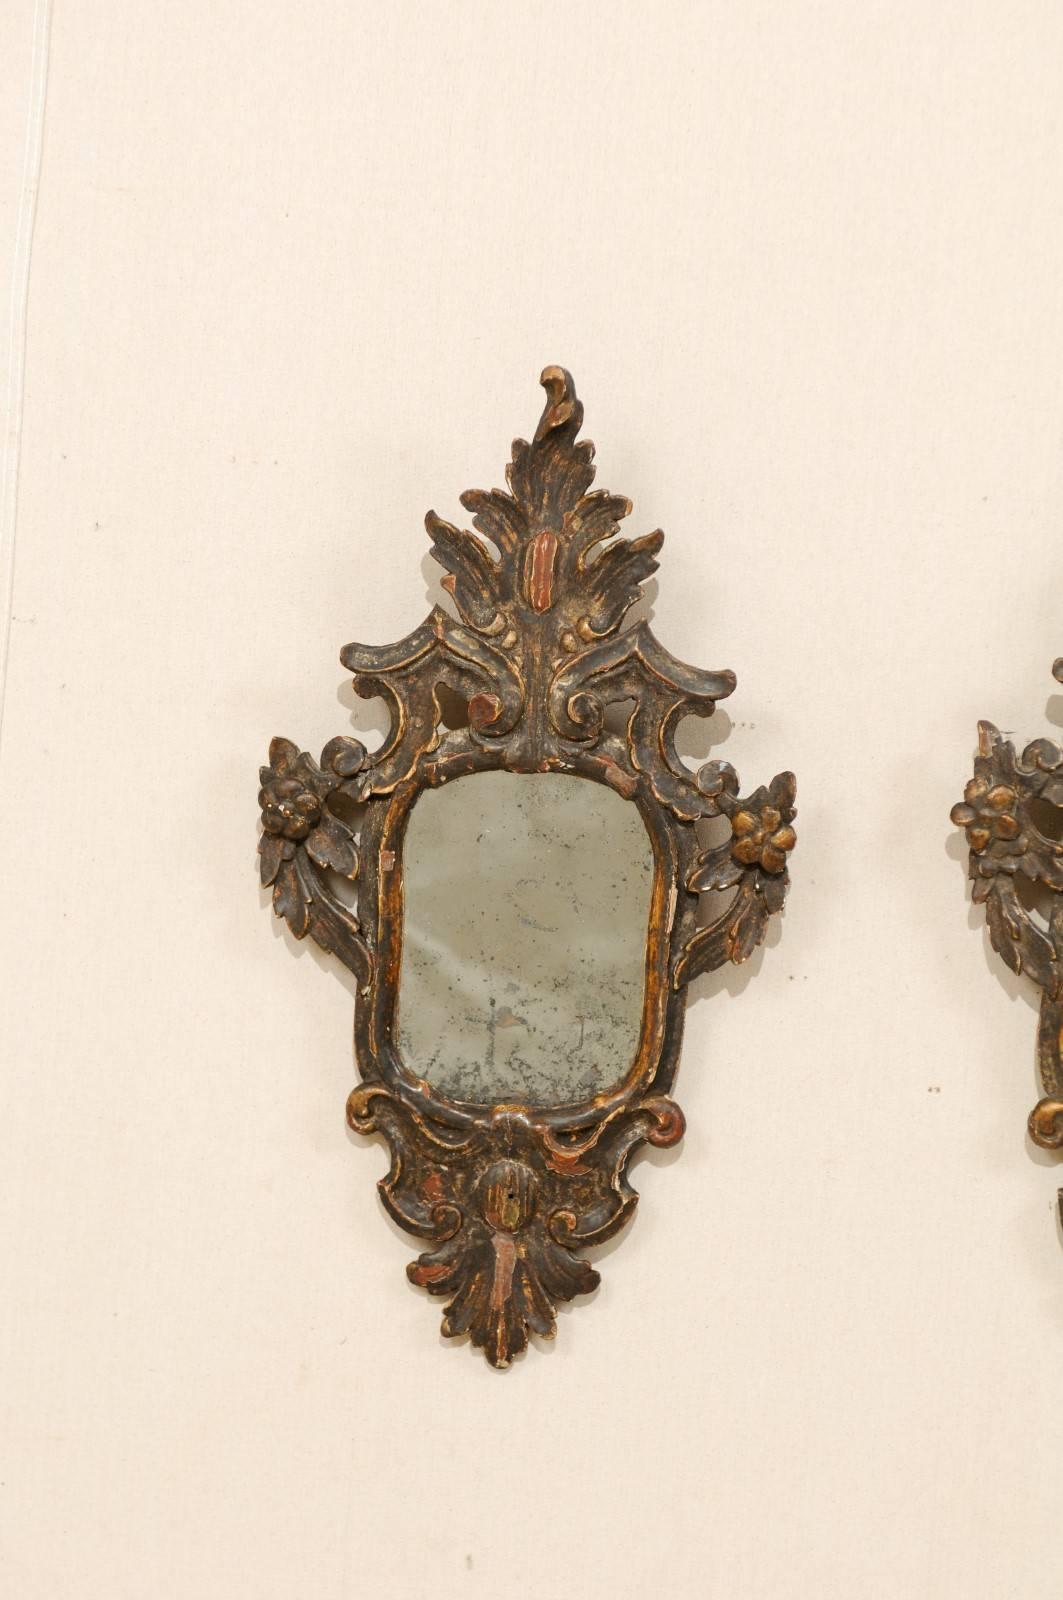 Carved Pair of Italian 18th Century Rococo Style Antiqued Mirrors with Gilding & Patina